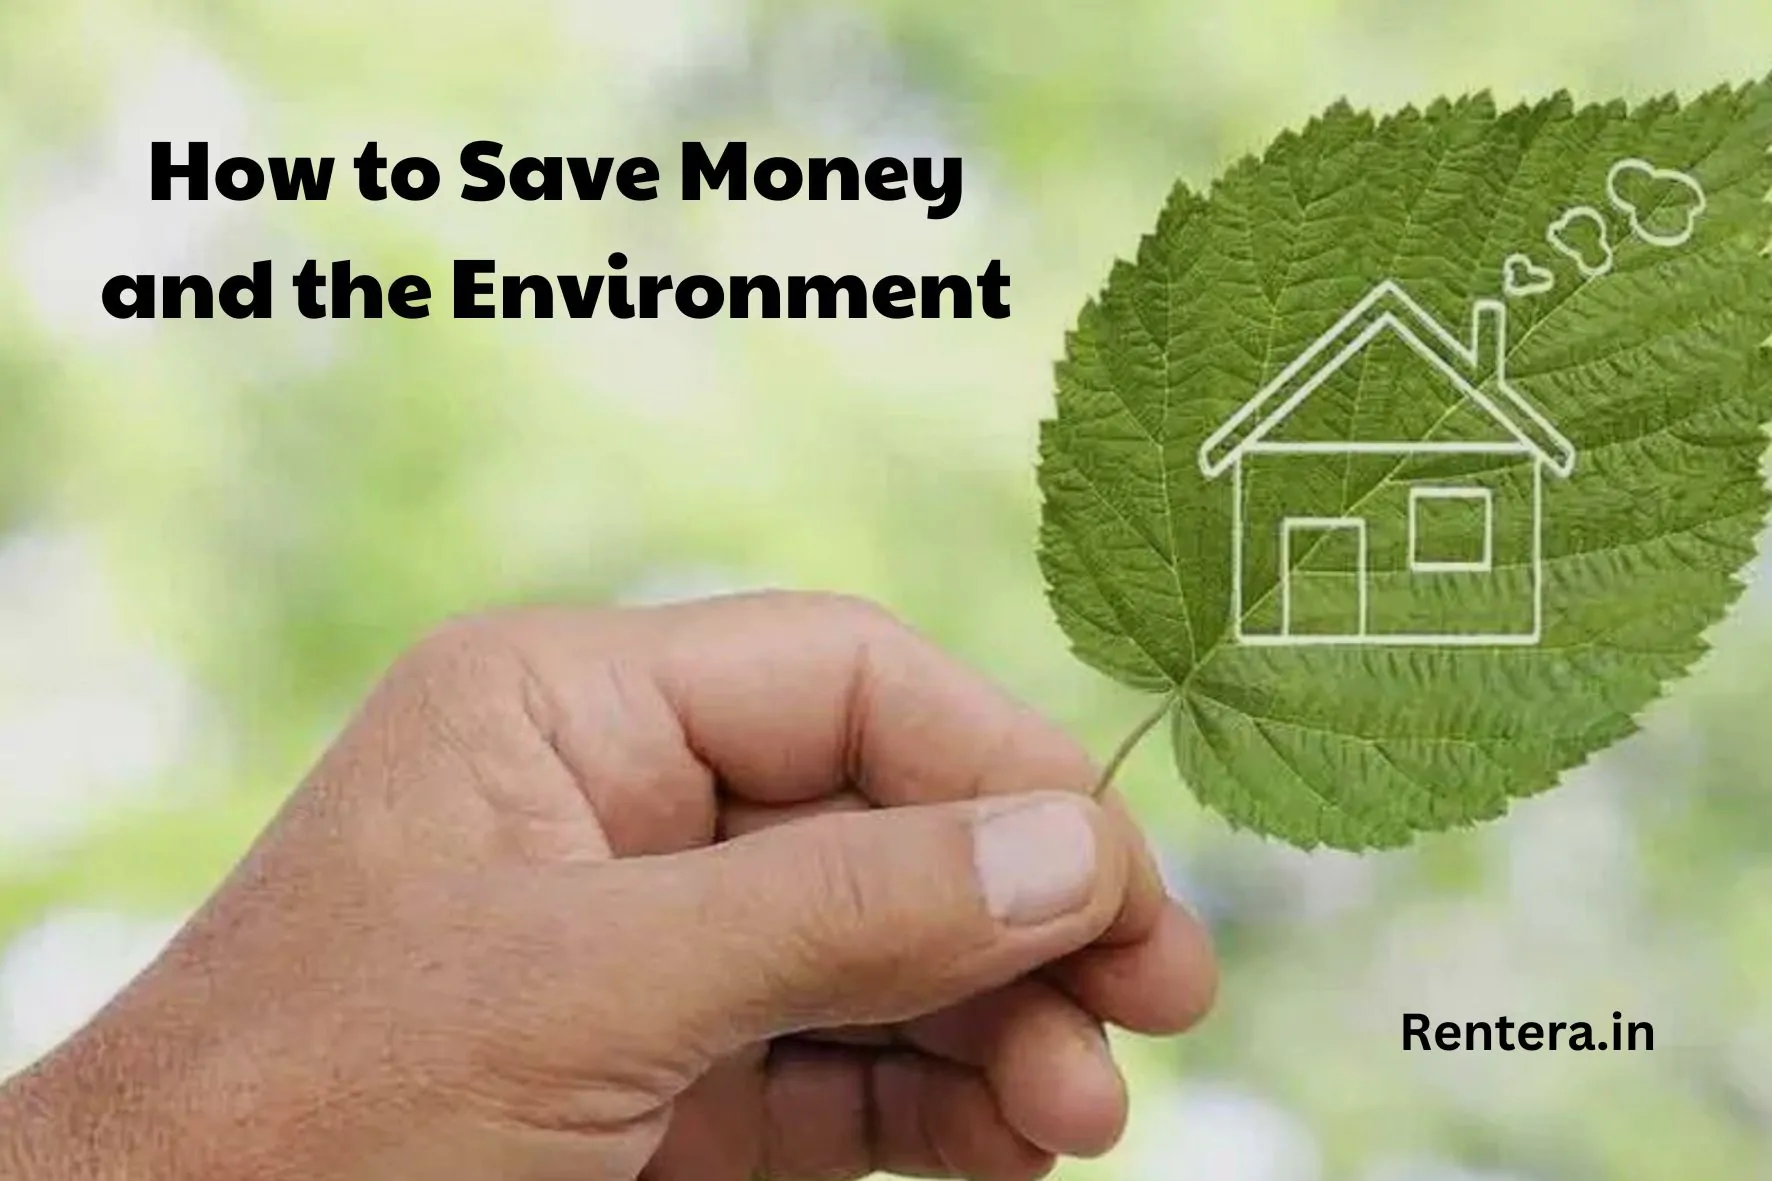 Renting Responsibly: How to Save Money and the Environment